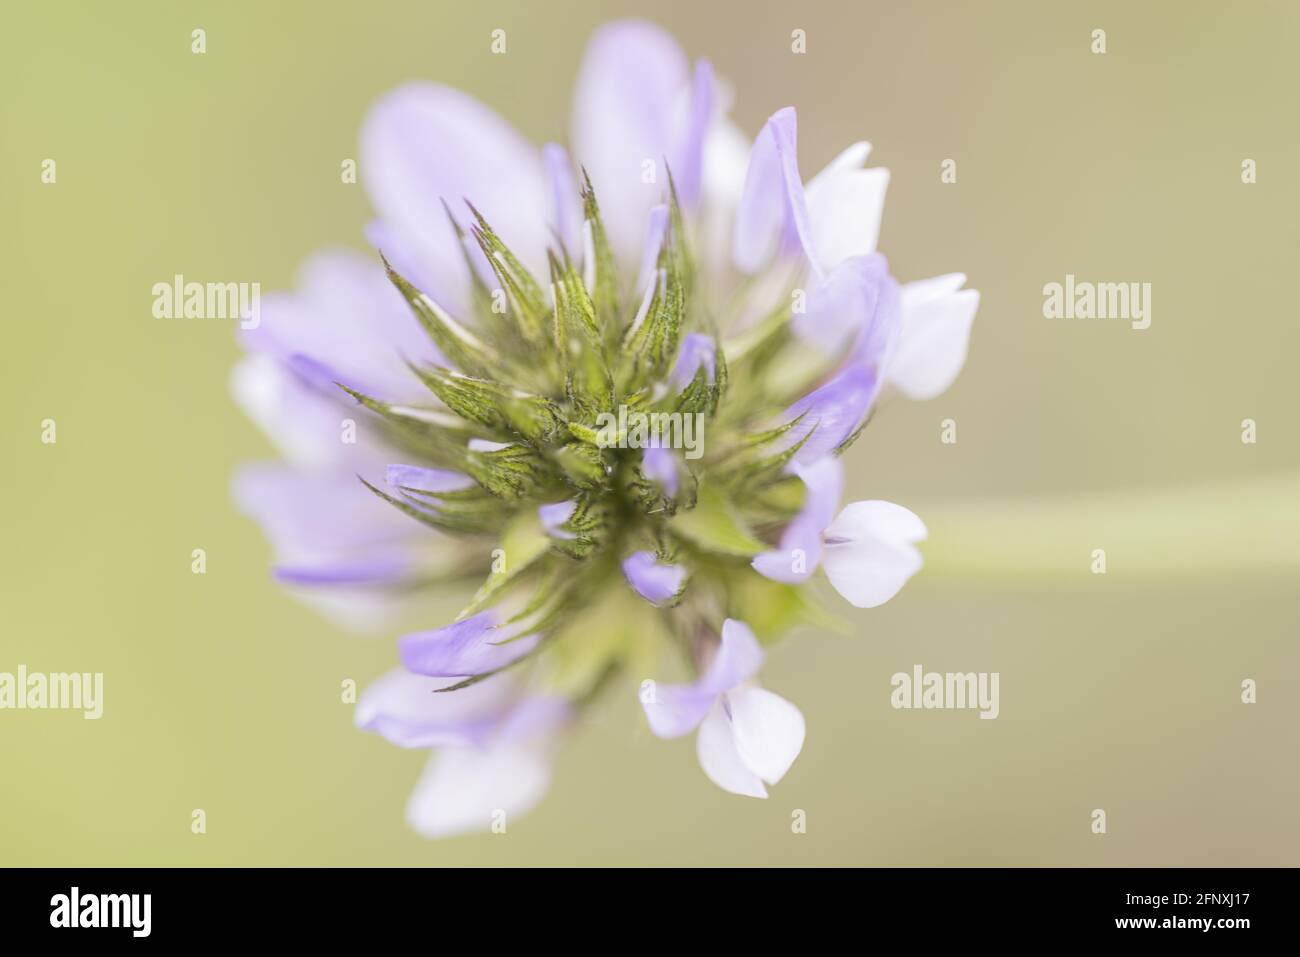 Closeup of a blooming psoralea in a field under the sunlight with a blurry background Stock Photo